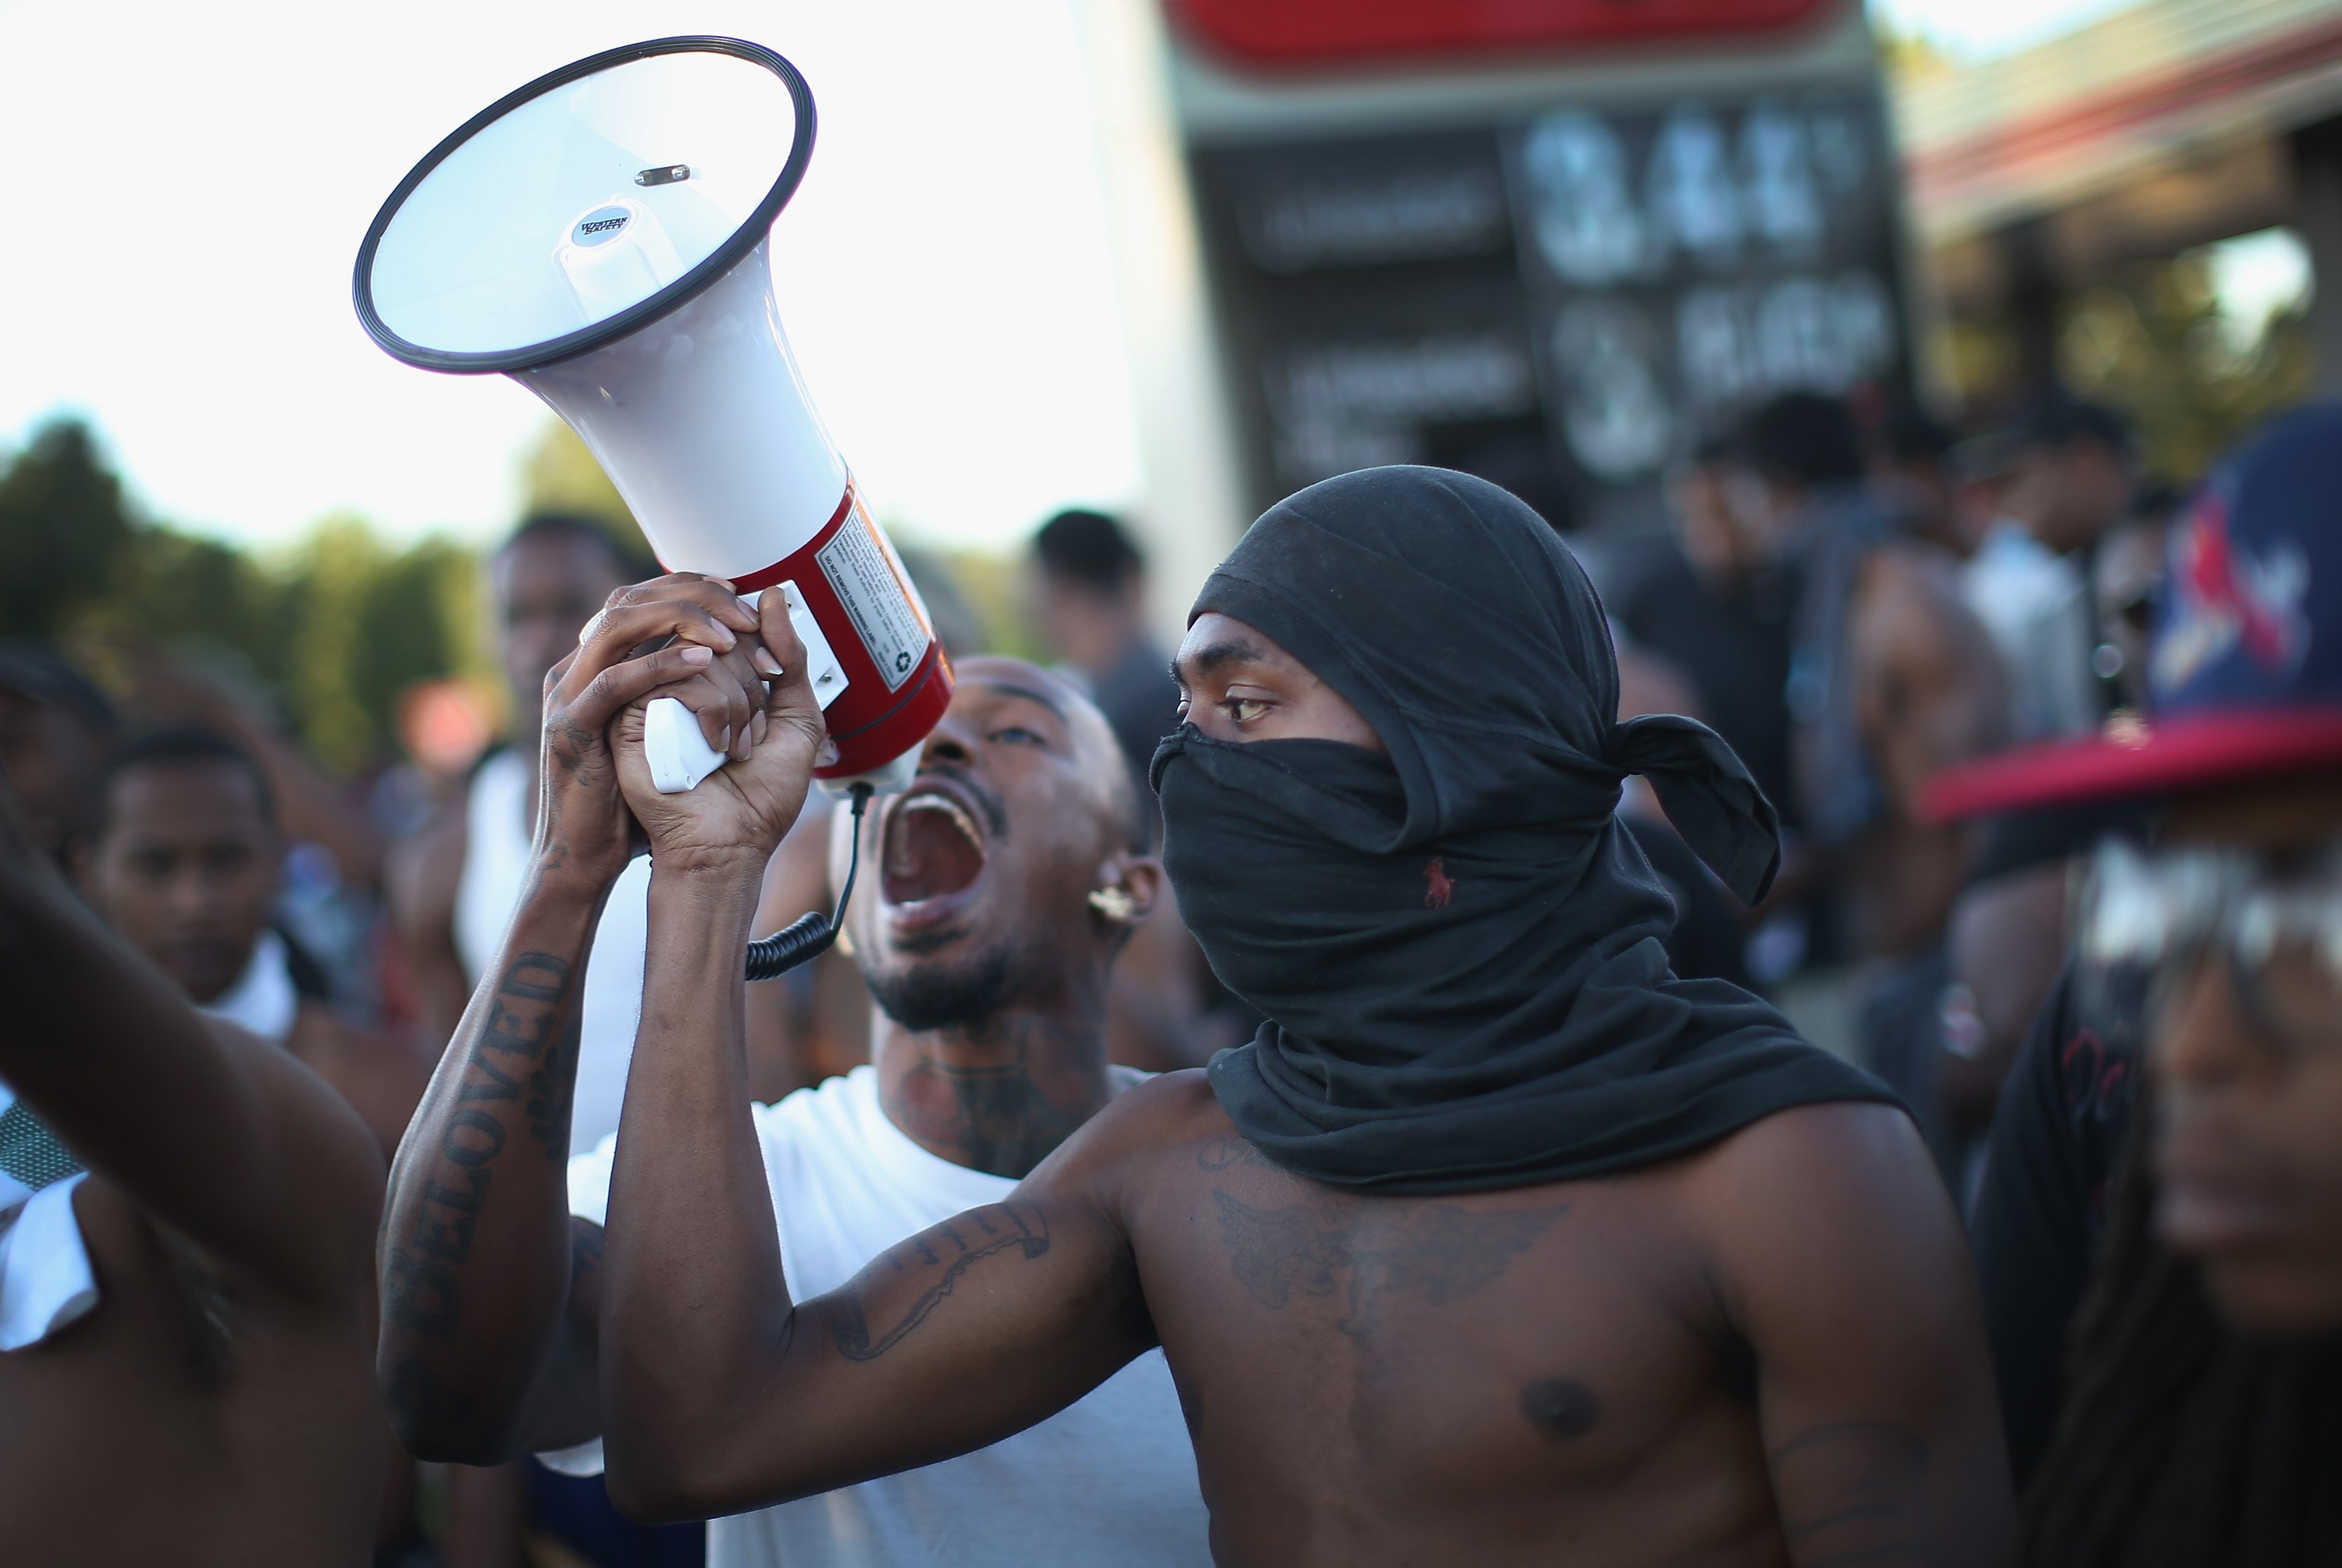 Demonstrators protest the killing of teenager Michael Brown in Ferguson, Mo. on August 12, 2014. (Scott Olson—Getty Images)